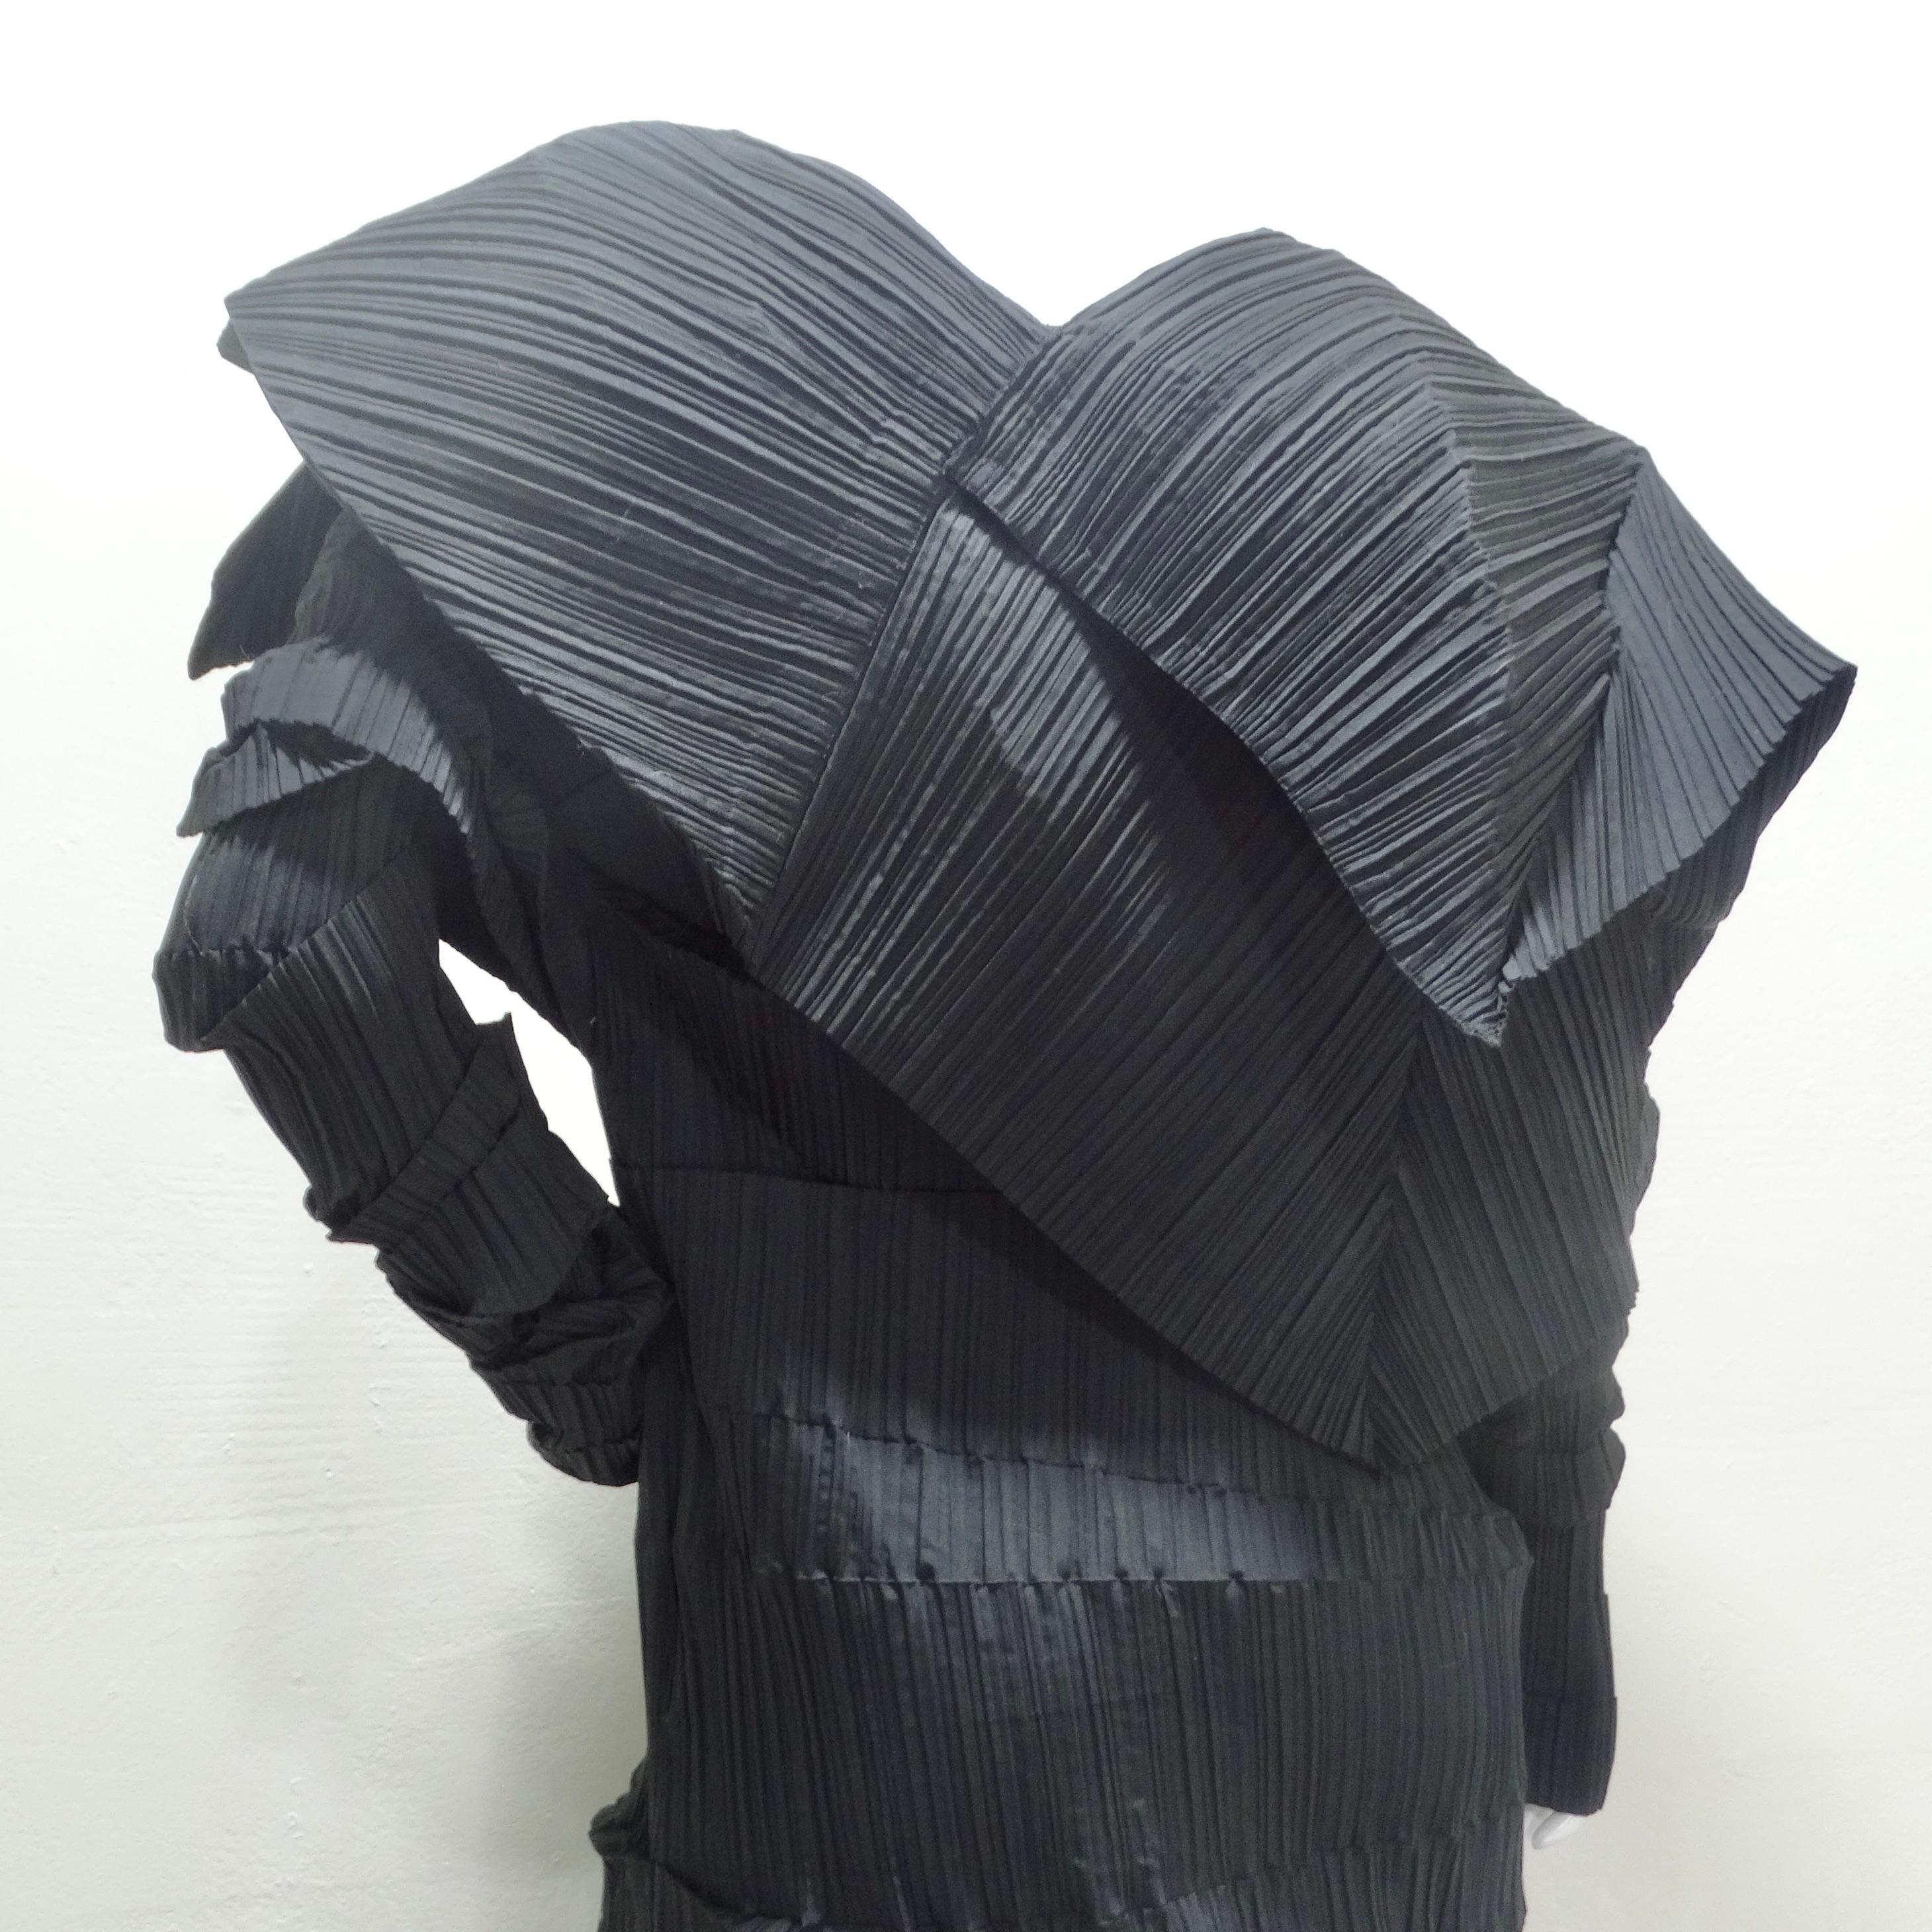 Issey Miyake 1989 Reverse Pleats Black Sculptural Museum Quality Dress For Sale 4